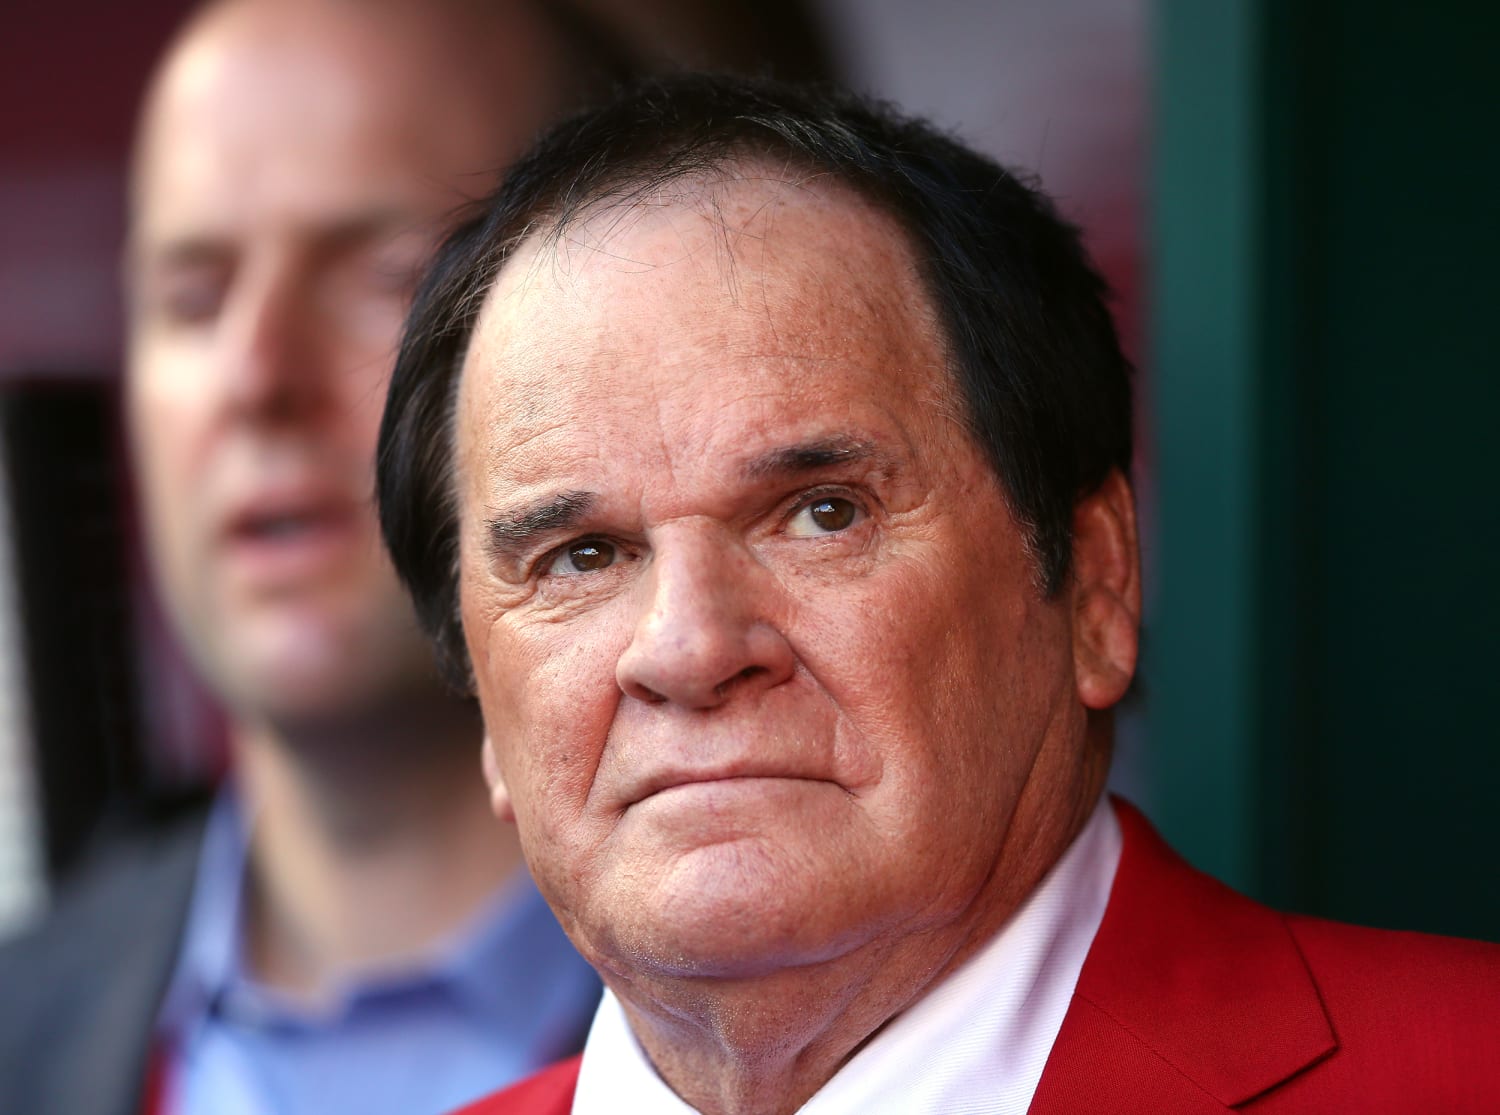 Phillies Cancel Pete Rose Tribute After Controversy Over Sex With Minor Allegations